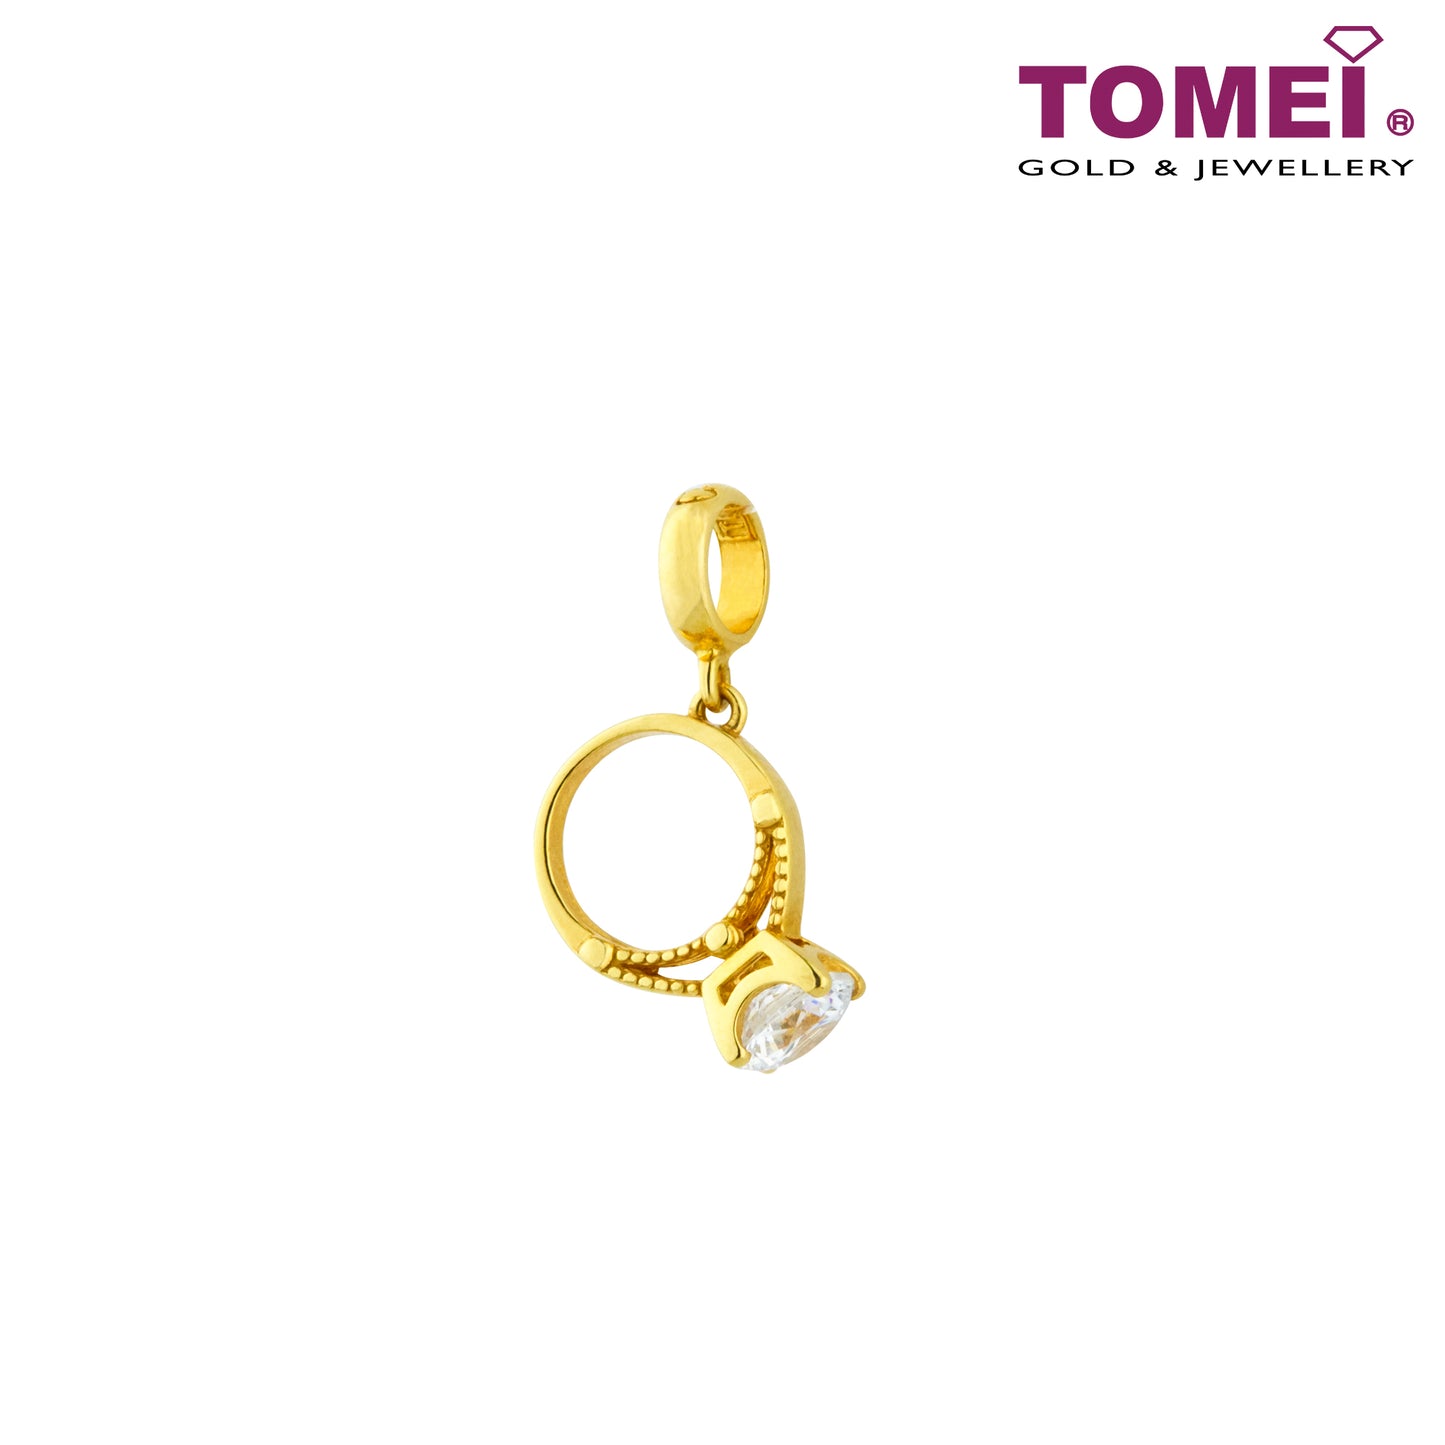 Tribute to Remarkable Women Diamond Ring Chomel Charm, Tomei Yellow Gold 916